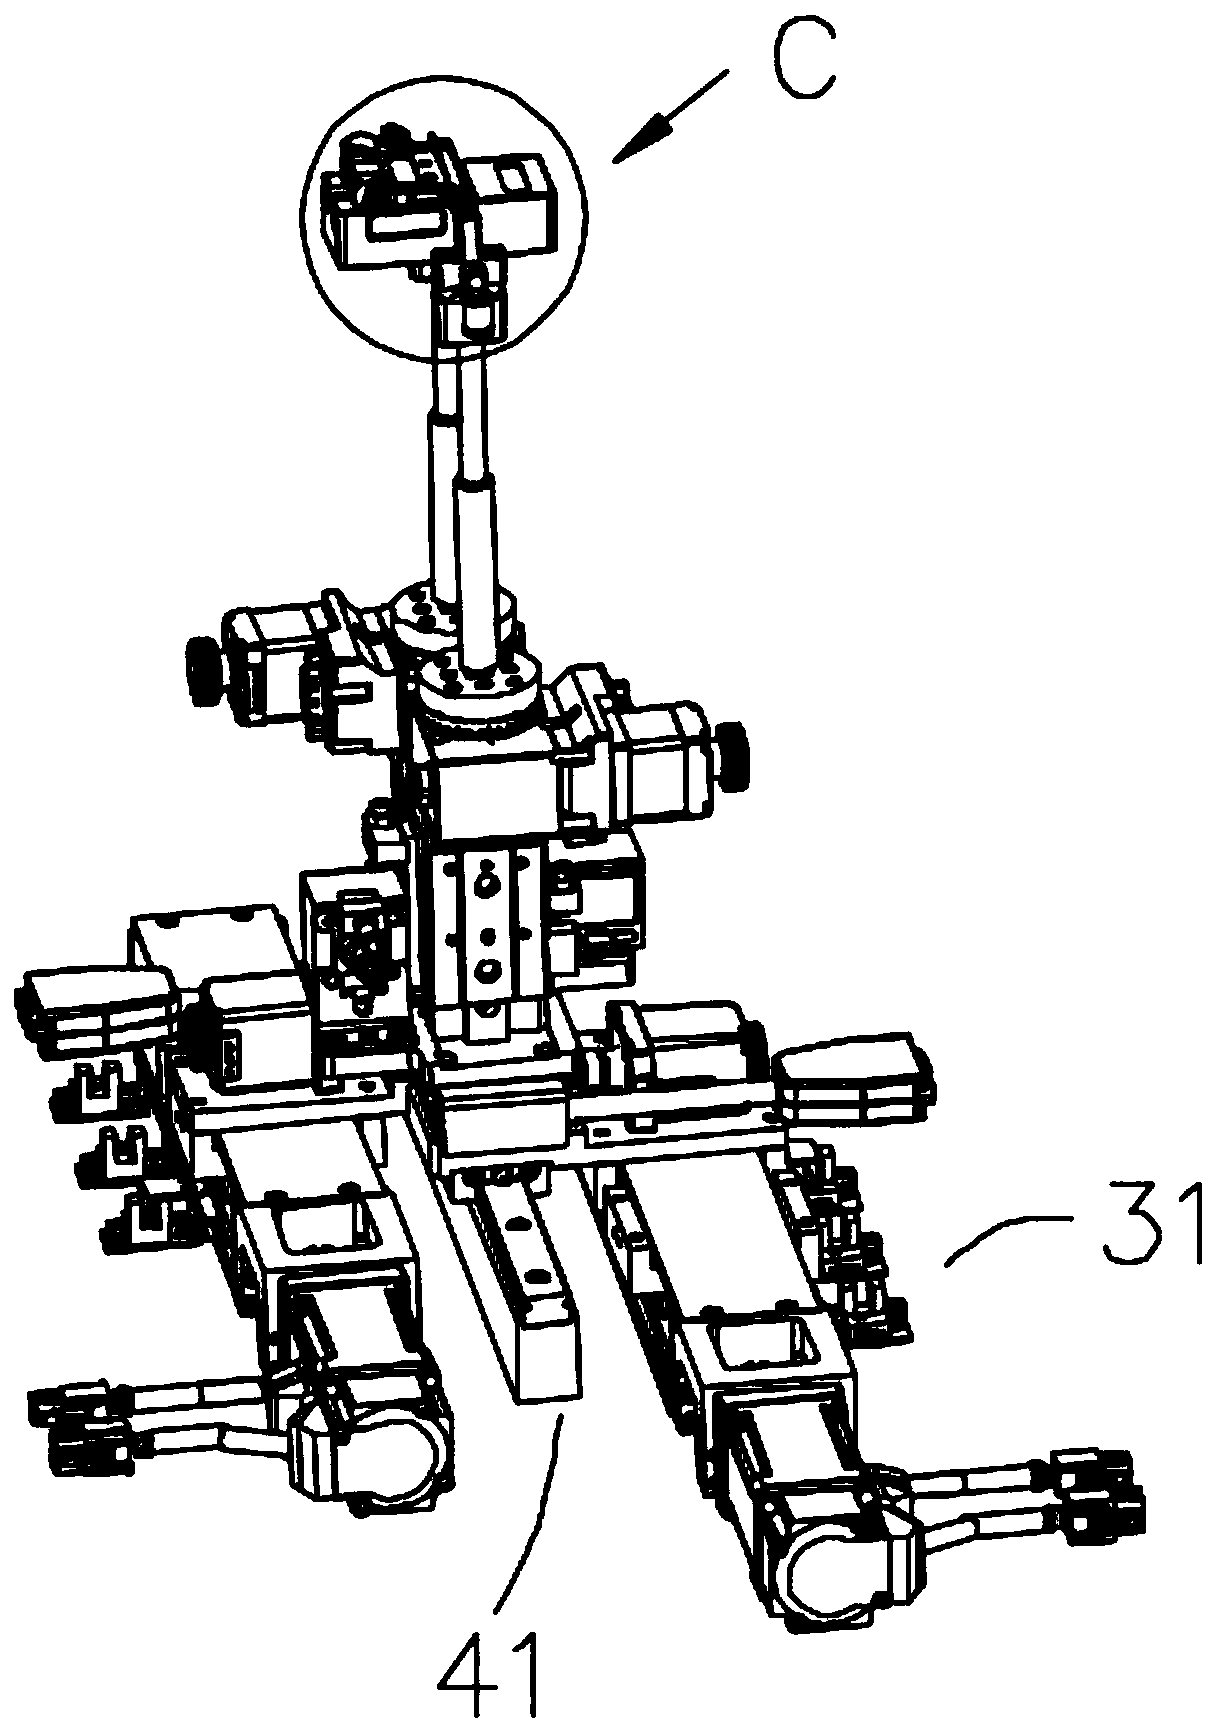 Photographing and labeling mechanism